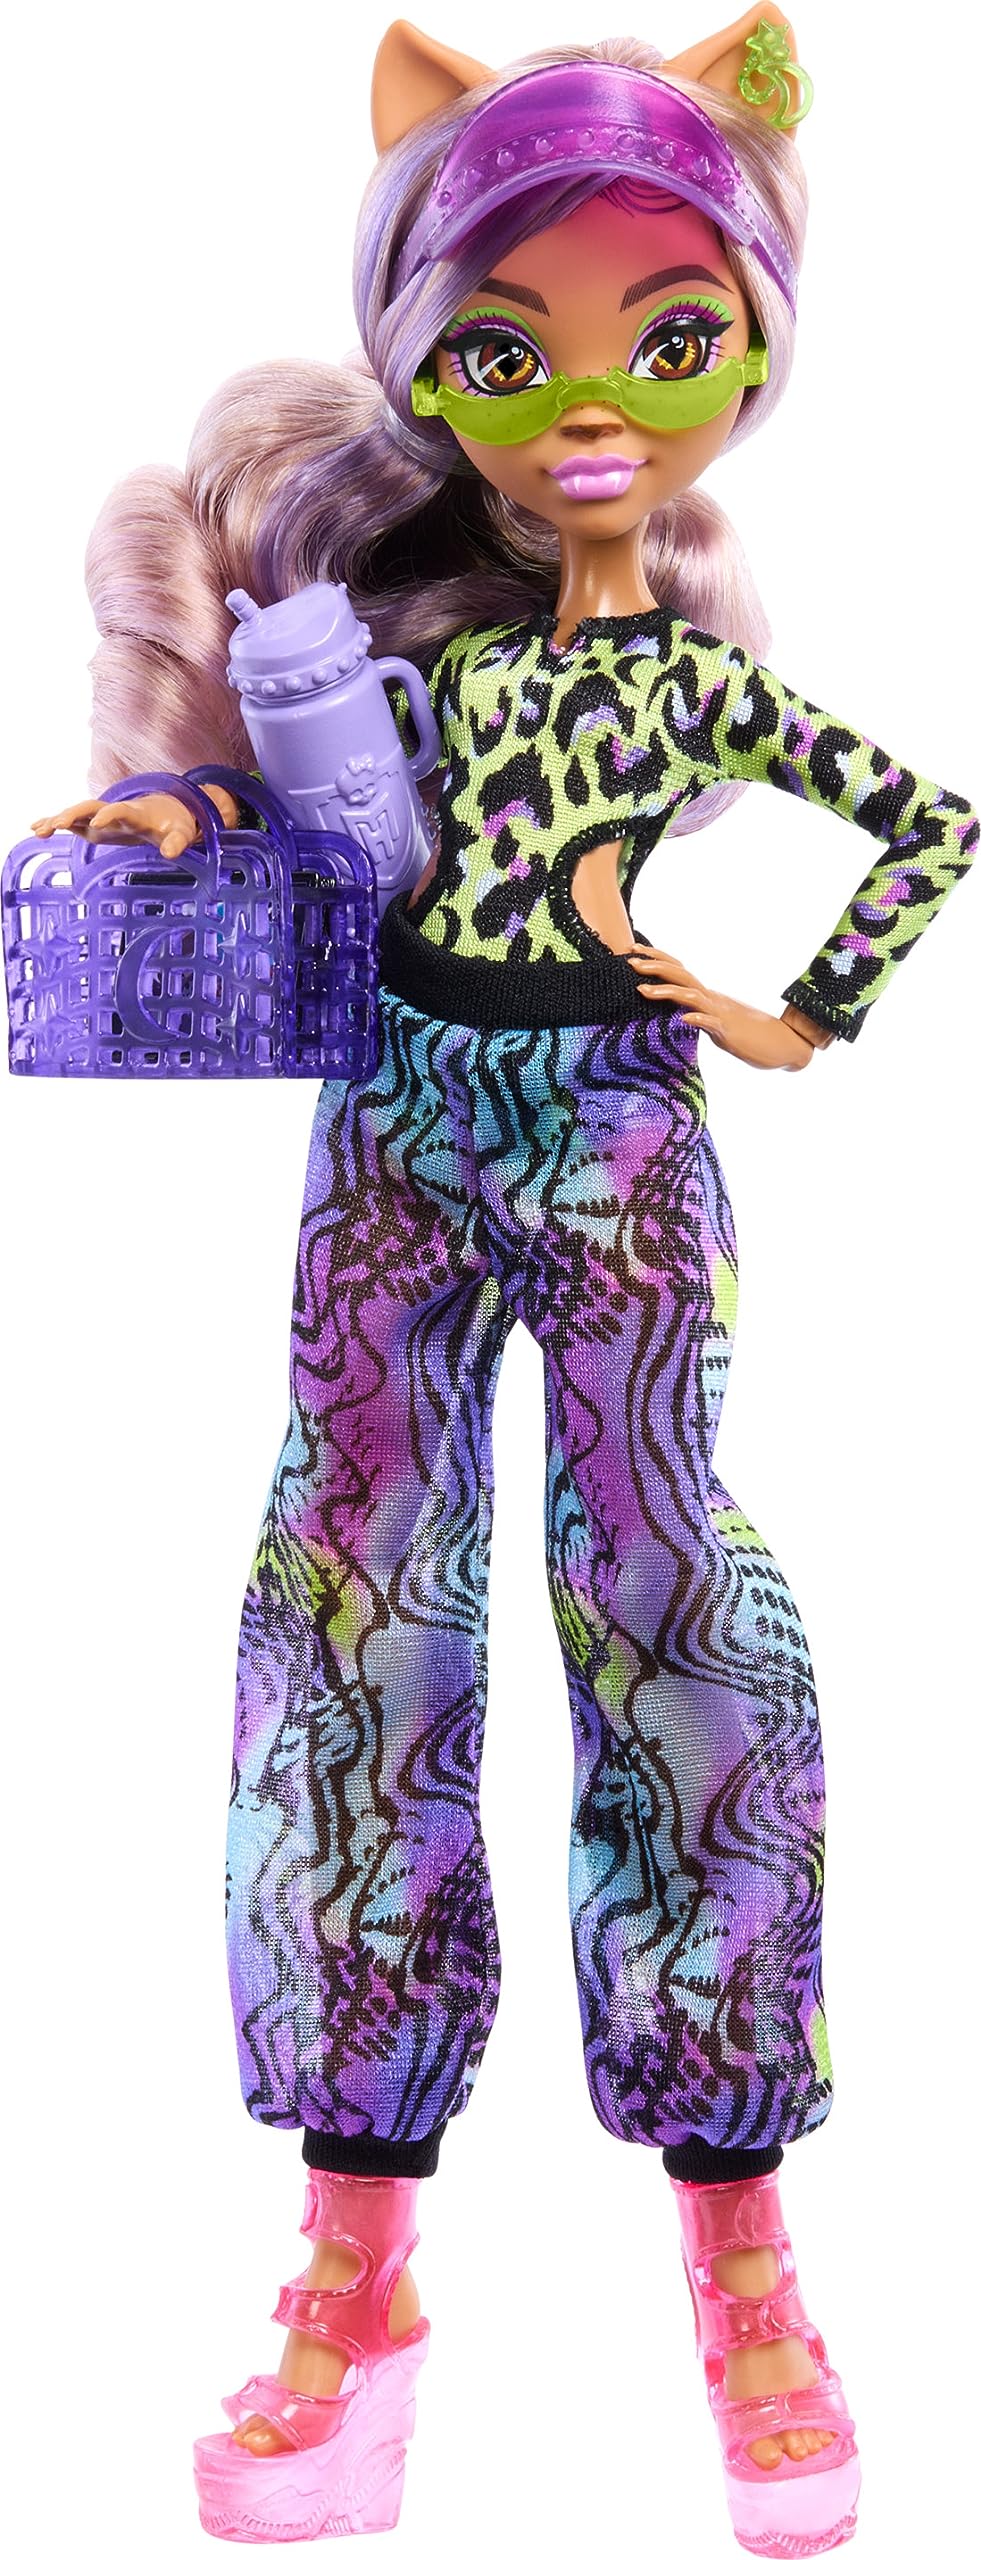 Monster High Scare-adise Island Clawdeen Wolf Doll with Swimsuit, Joggers and Beach Accessories Like Visor, Water Bottle, and Book